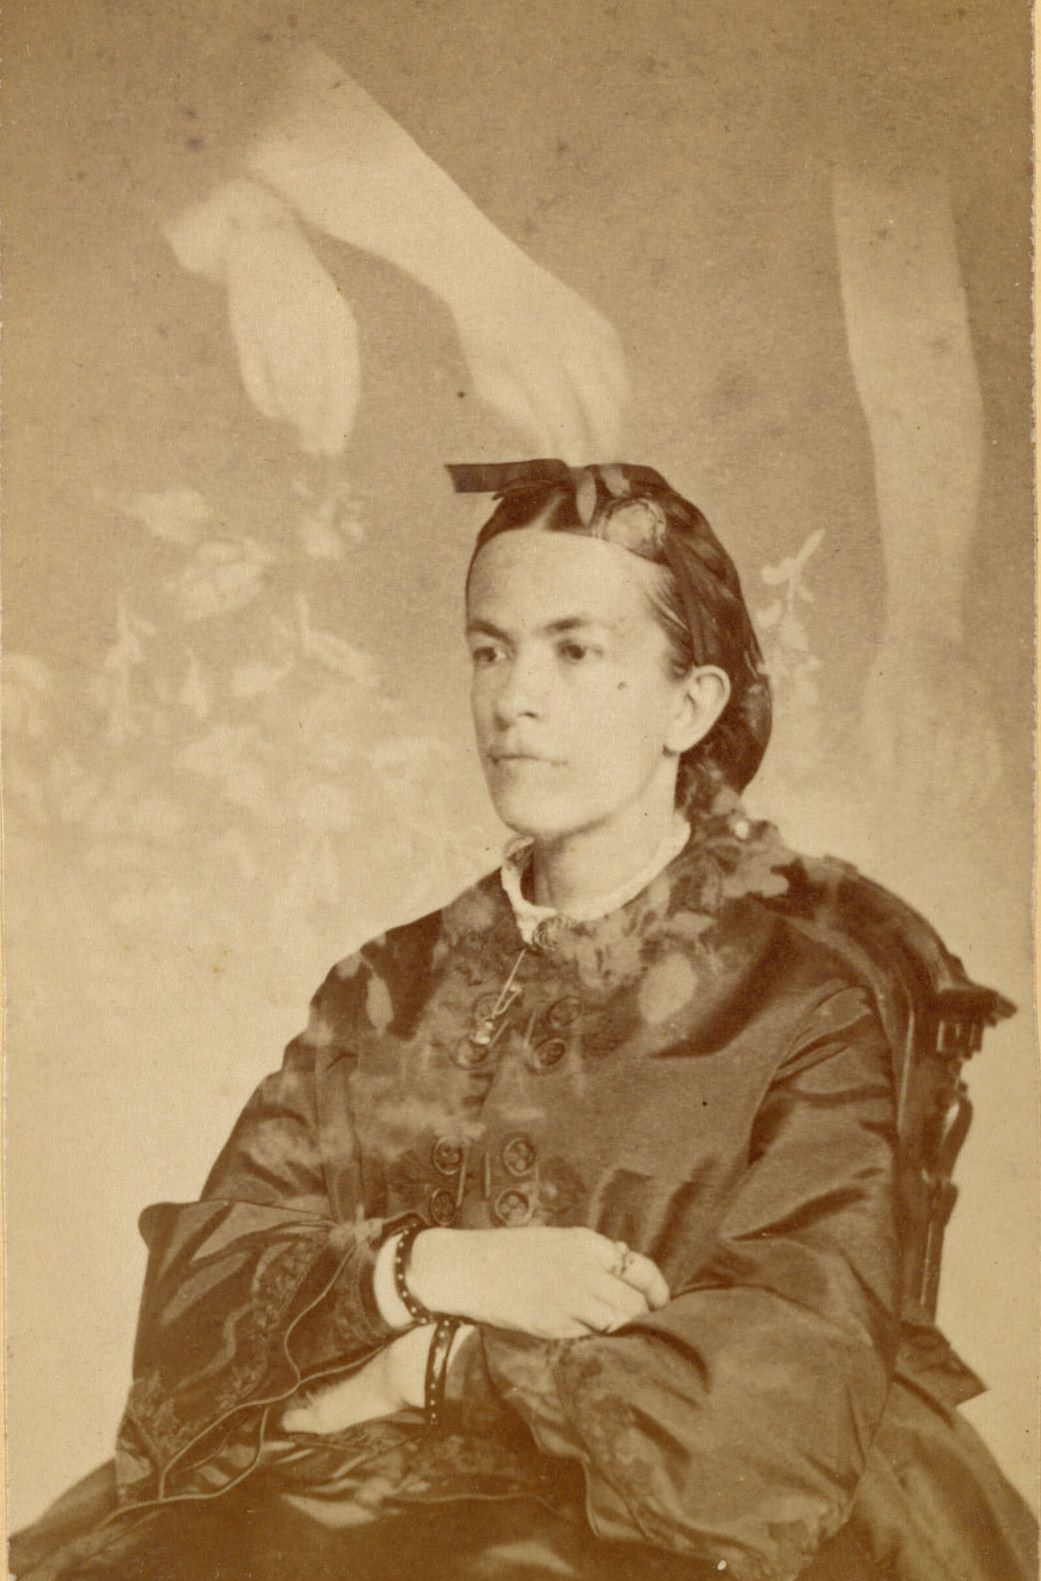 Unidentified young woman seated with her arms crossed. Faint images of three arms and flowers float over her head.